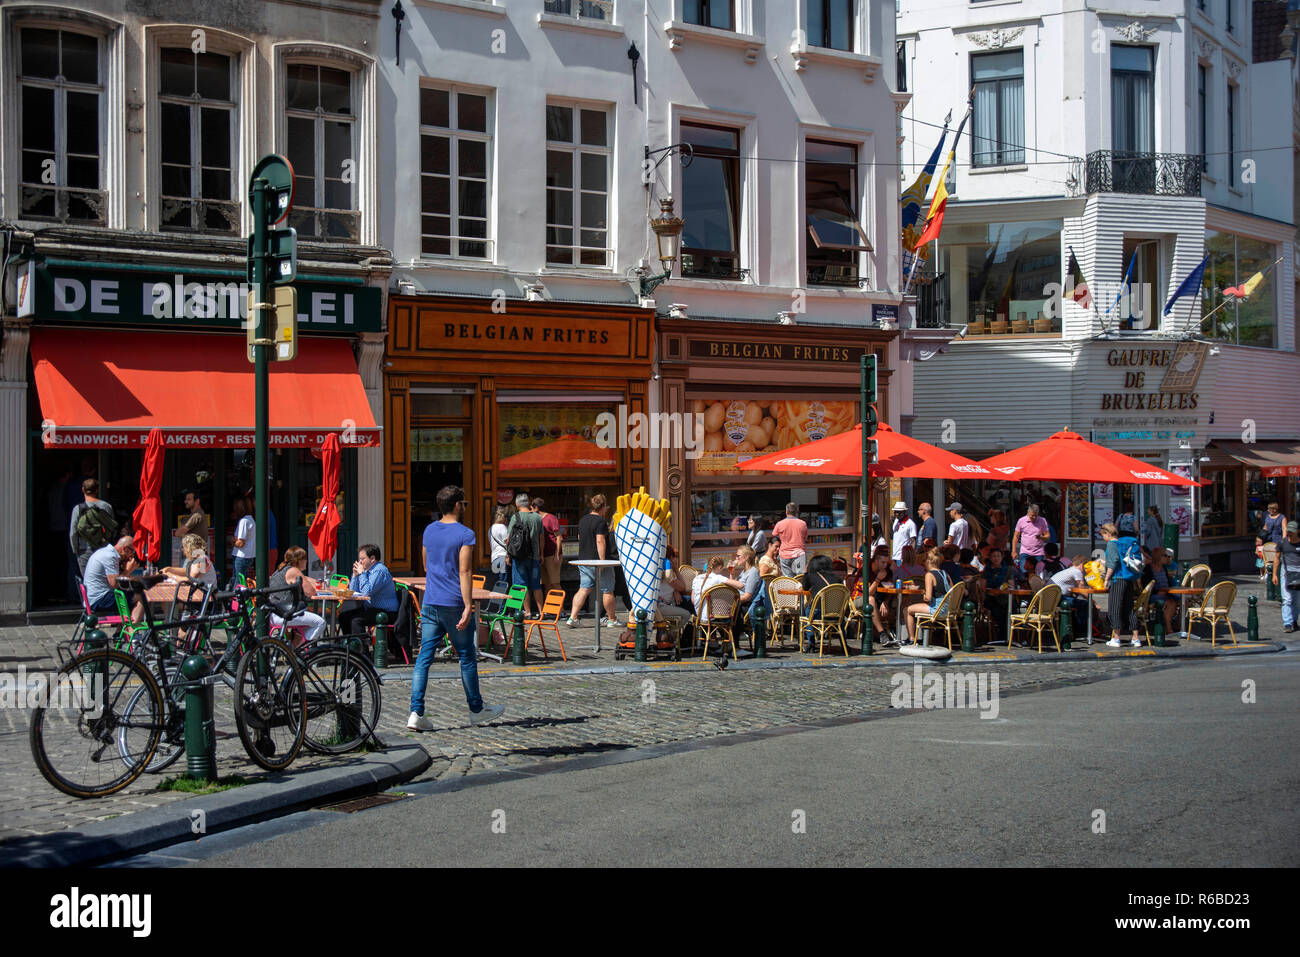 Restaurants in Rue du Marché Aux Herbes street at Brussels city center. Stock Photo